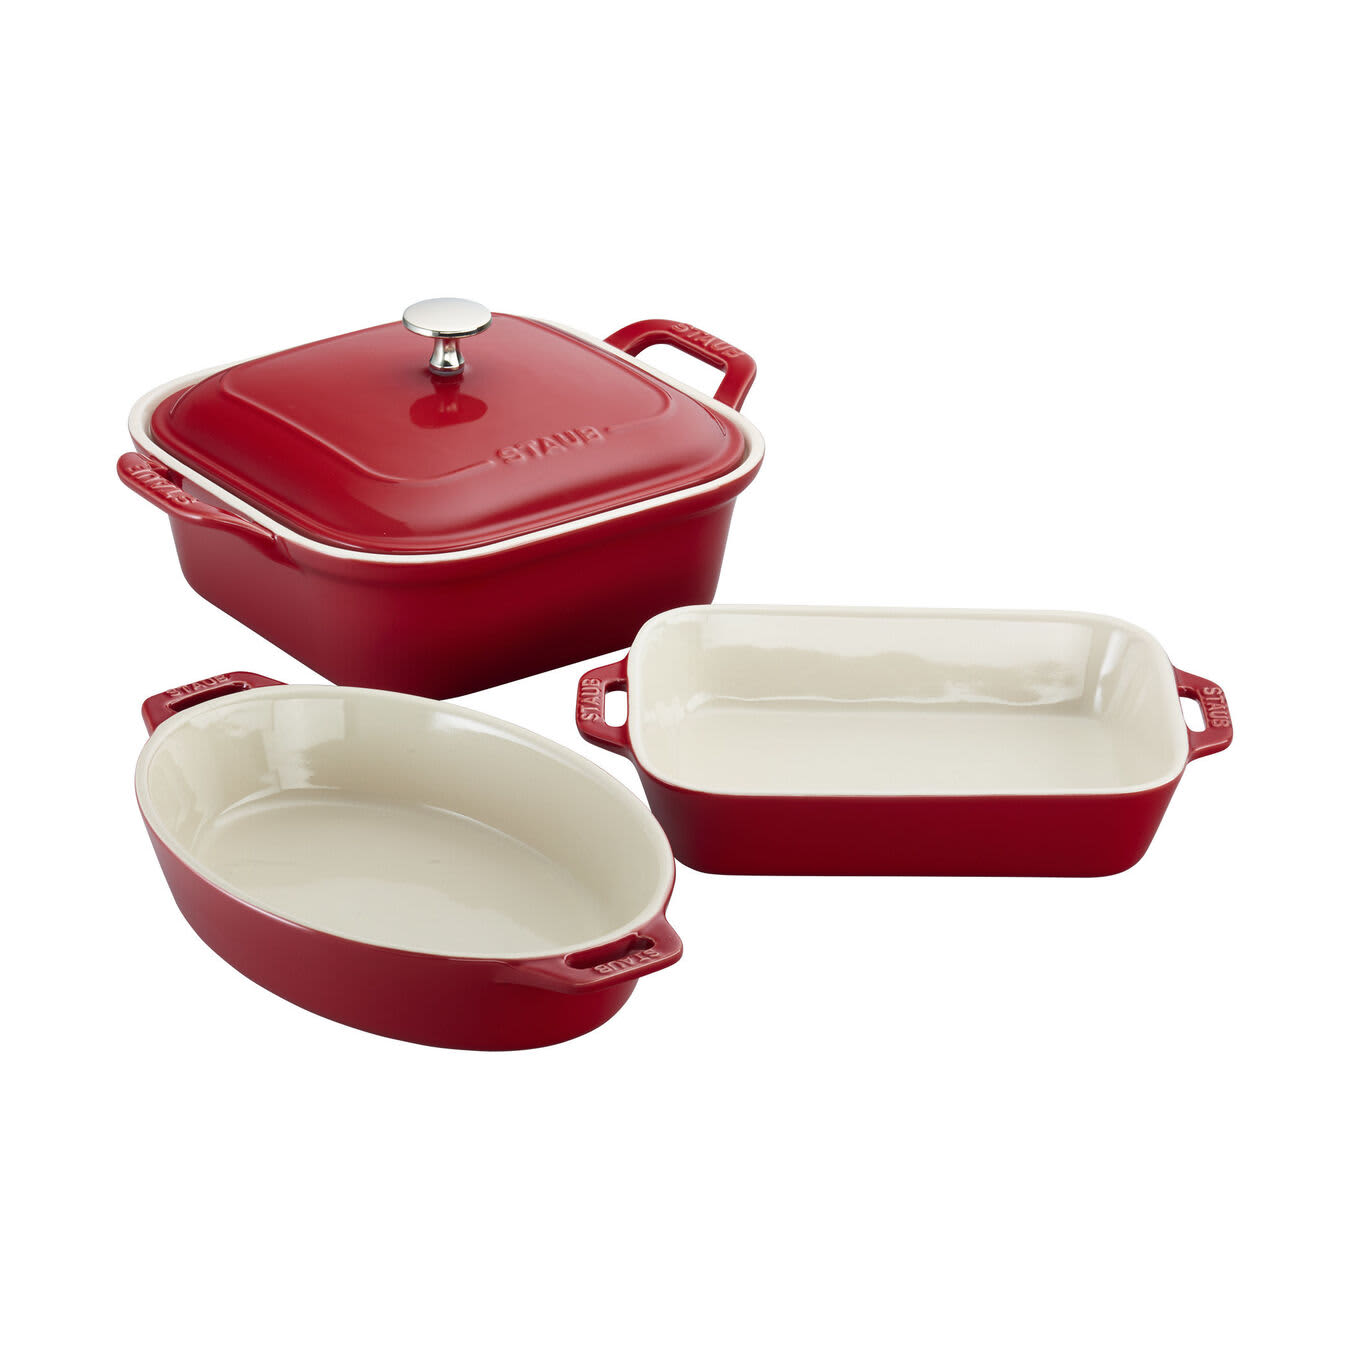 STAUB deals : on SALE for black friday! — FIVE MARYS RANCH